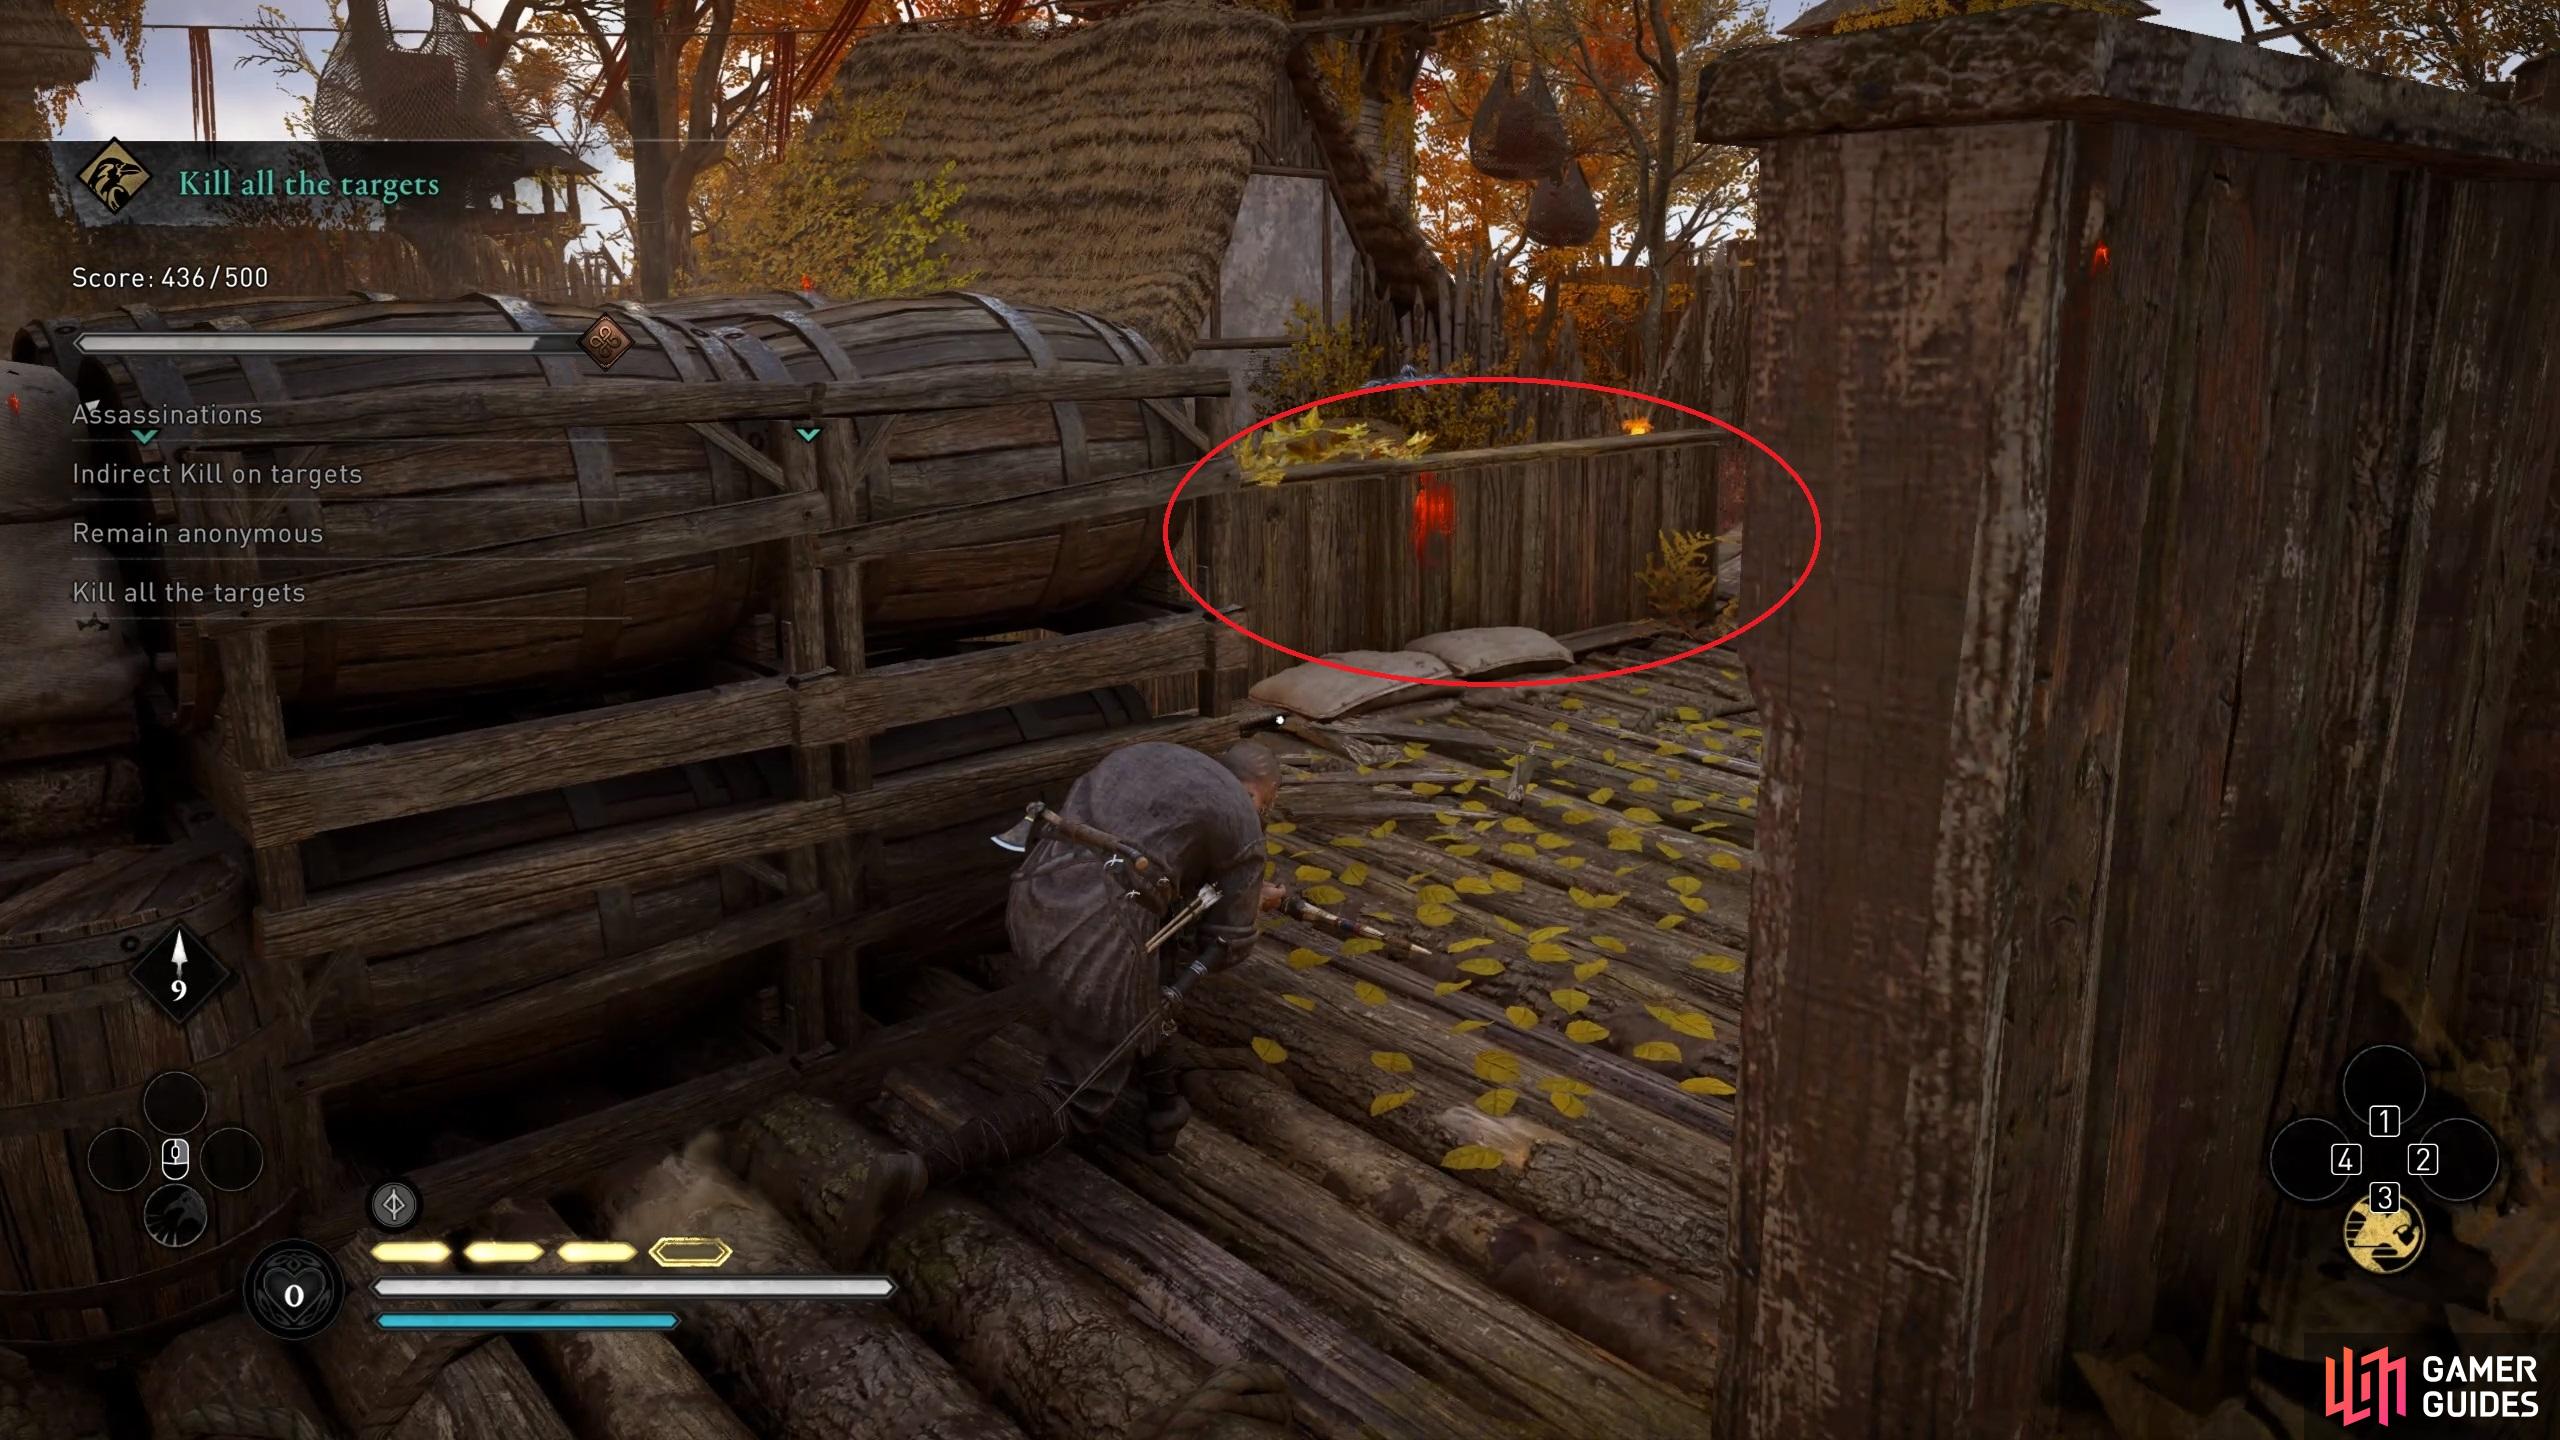 Enemies can sometimes see beyond these wooden walls on the battlements, so use other objects to hide from their view or use Raven Distraction to stun them before you move.